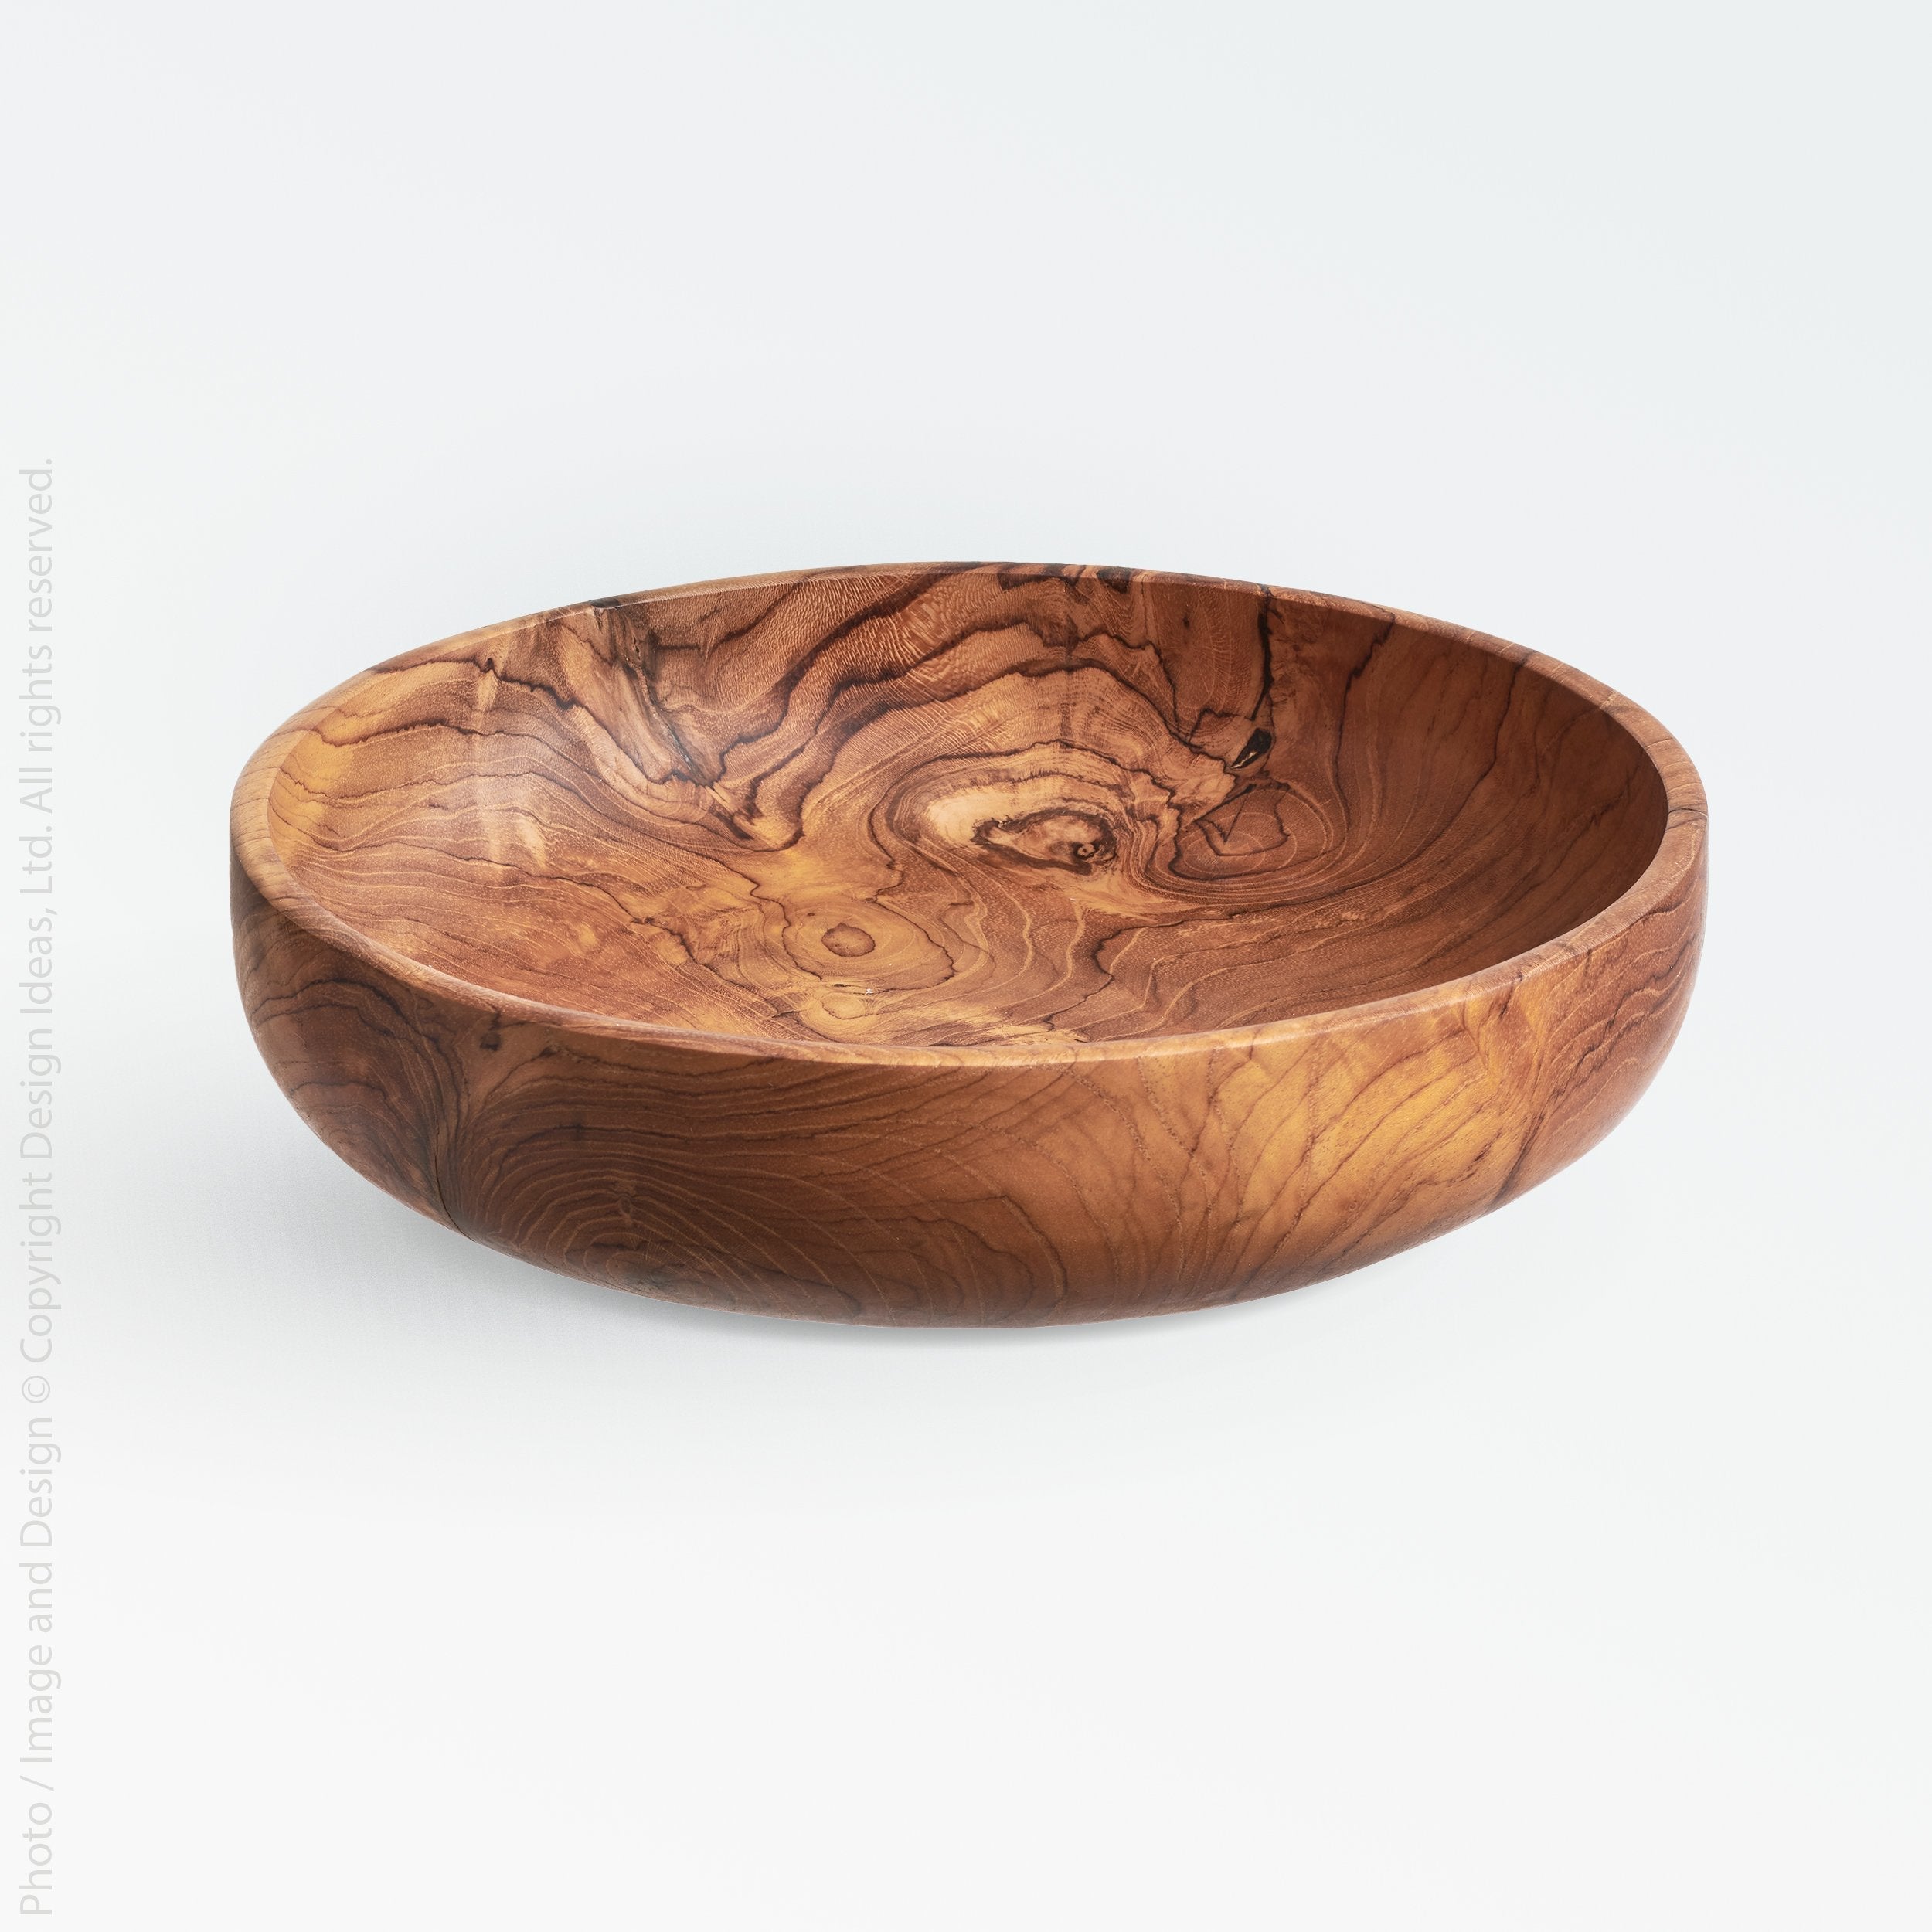 Chiku™ bowl (8.3" dia) - Natural | Image 1 | Premium Bowl from the Chiku collection | made with Teak wood for long lasting use | sustainably sourced with recycled materials | texxture